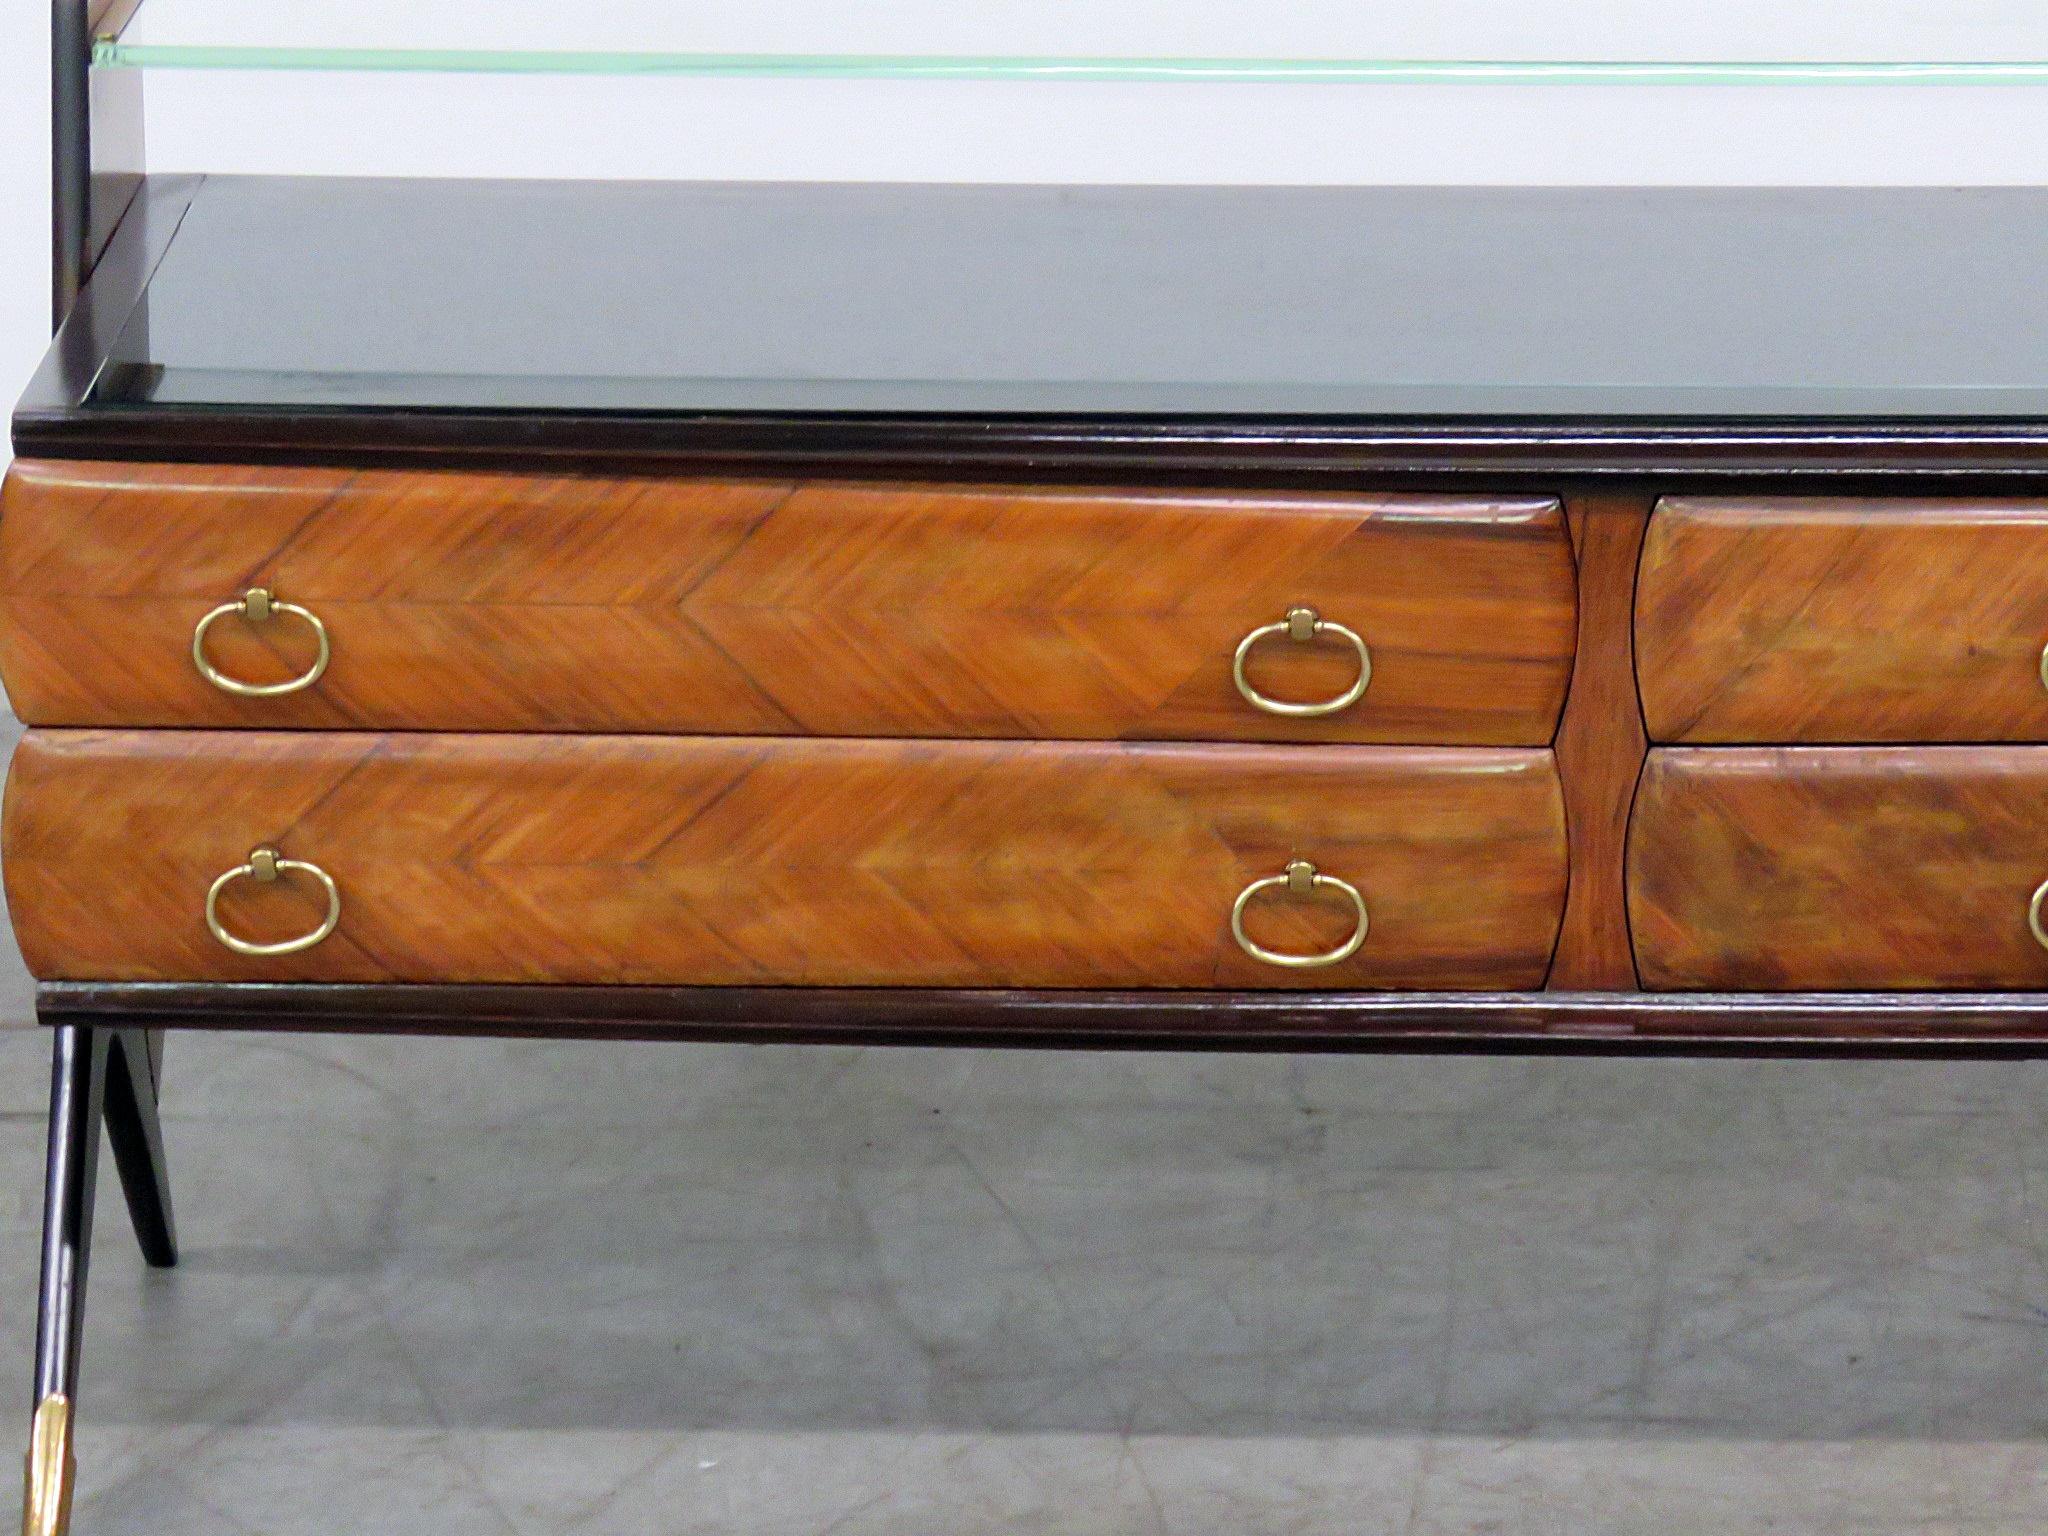 Italian modern glass top credenza with six drawers and brass tips on the front feet.